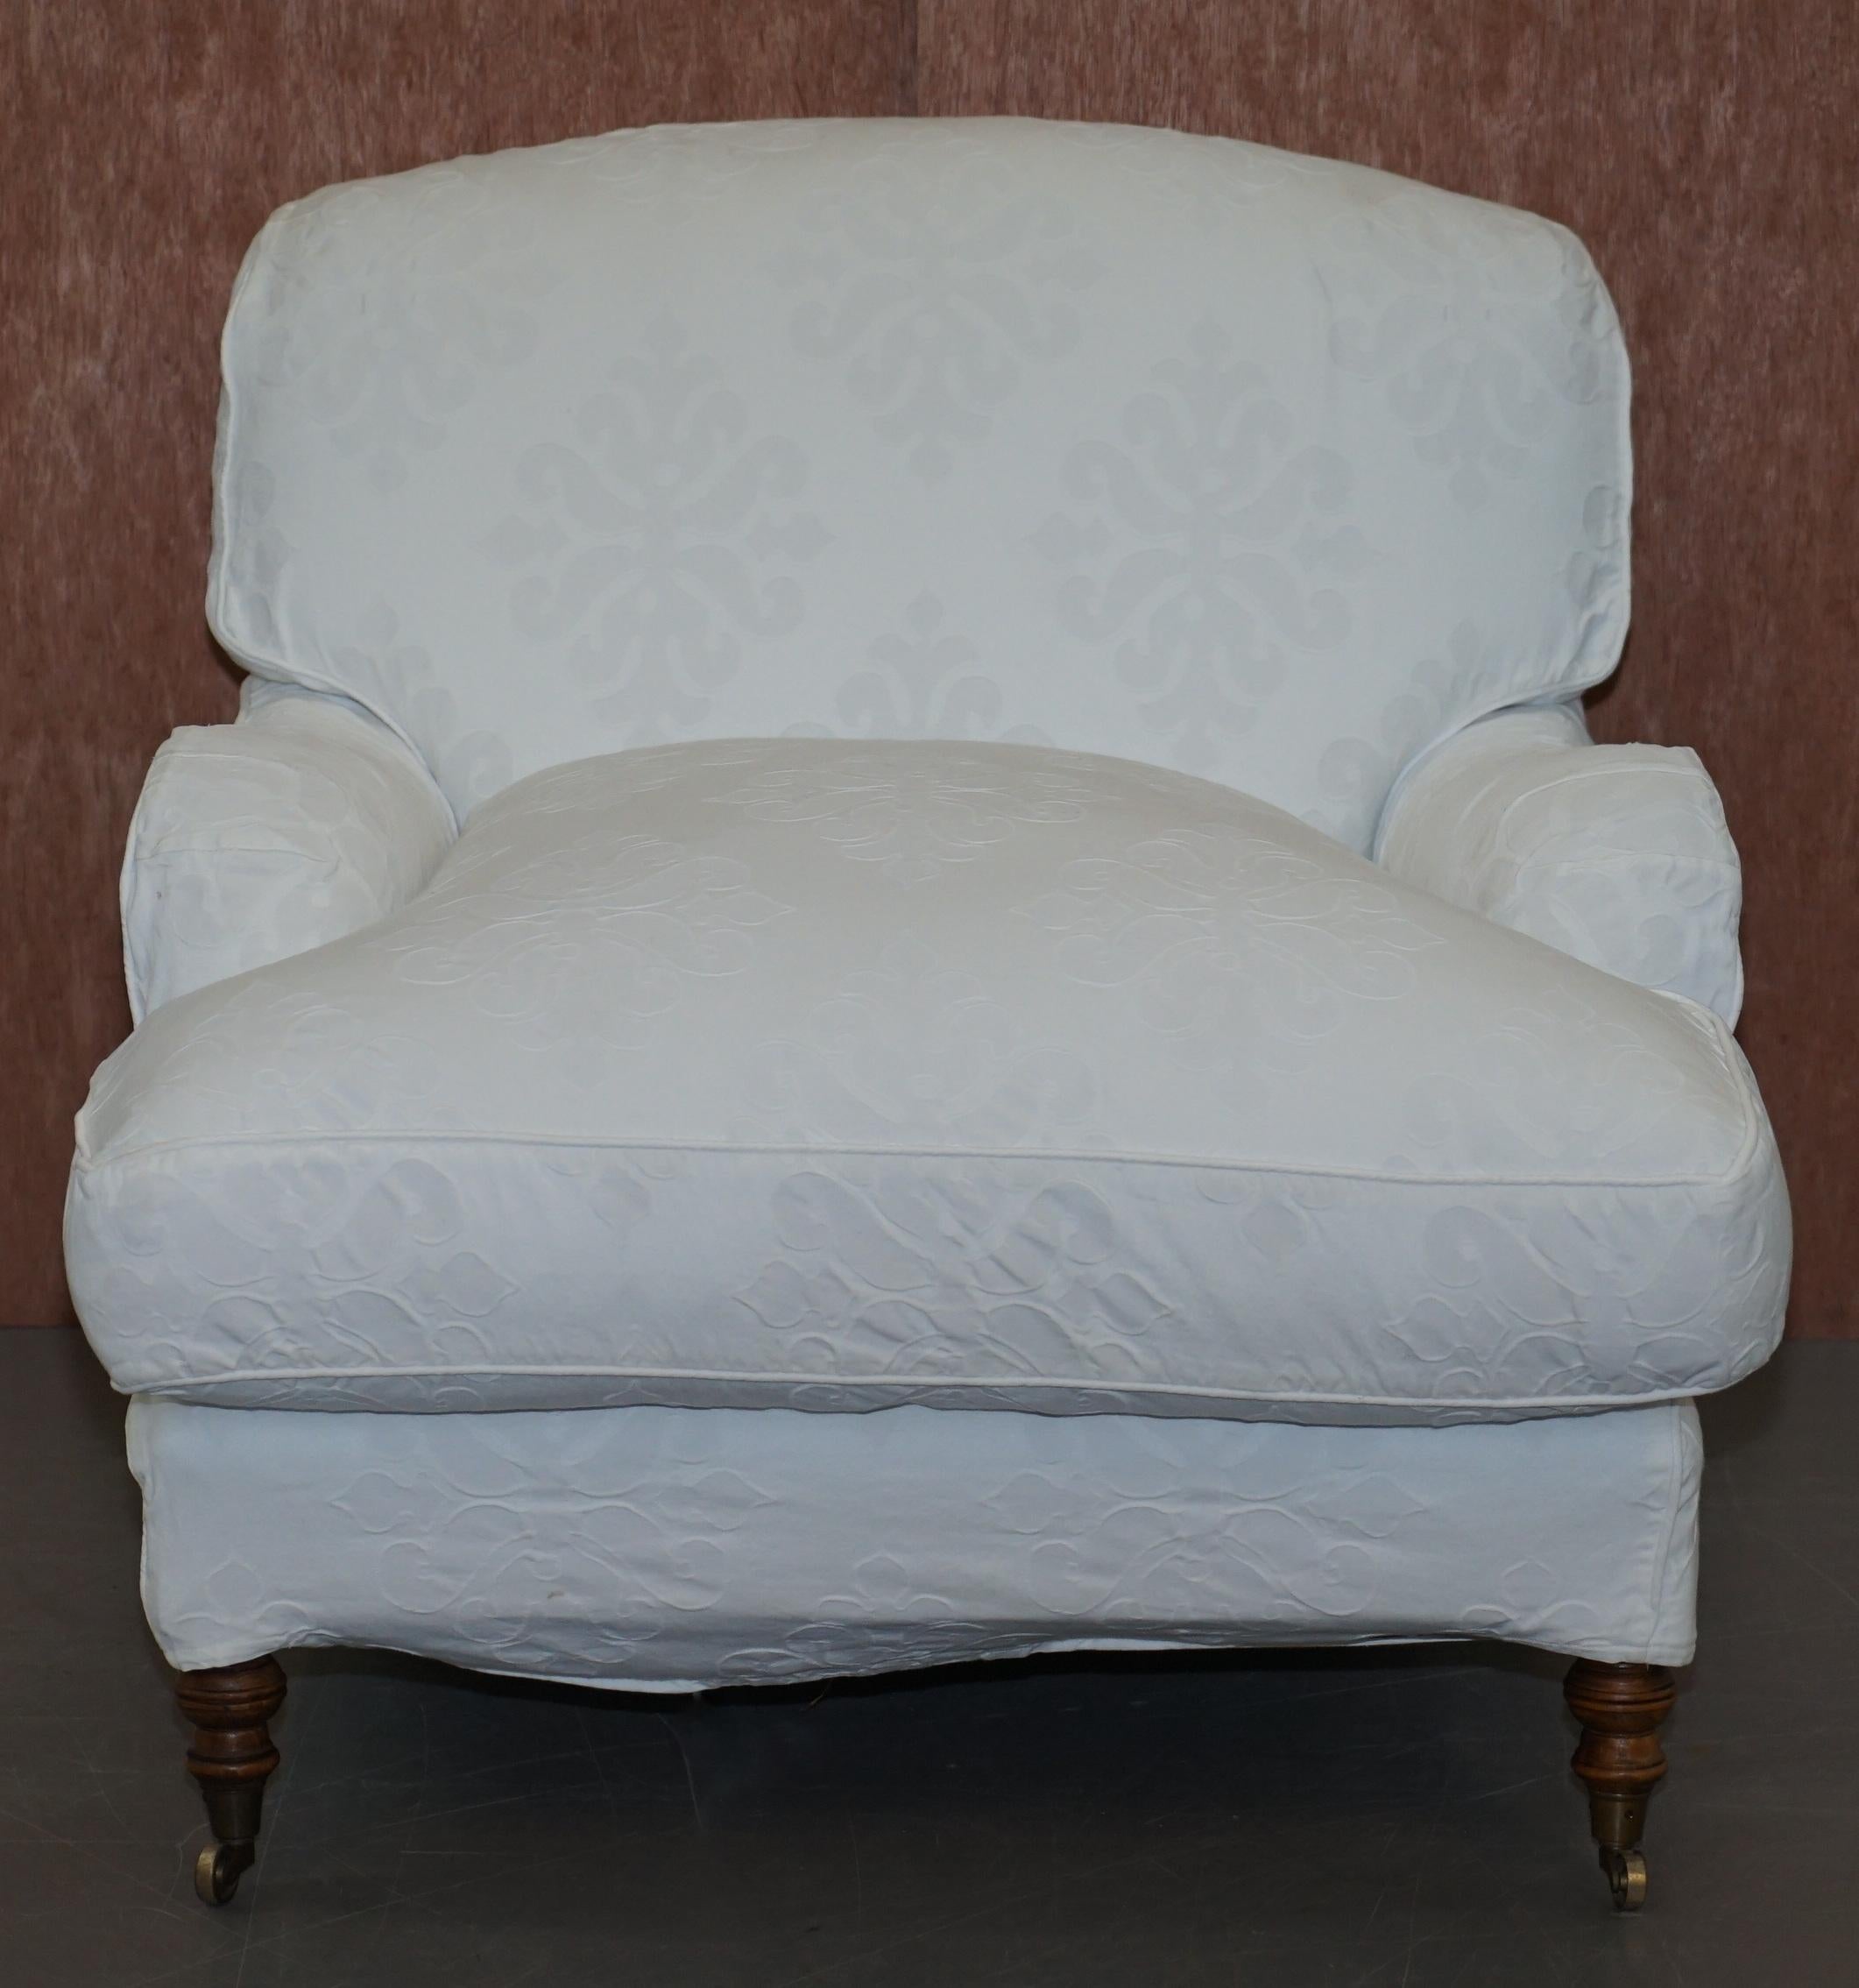 We are delighted to offer for sale this lovely original George Smith aignature scroll arm long platform base club armchair RRP £4900

A good looking and well made chair, it has a mahogany frame, the original castors, an over stuff feather filled